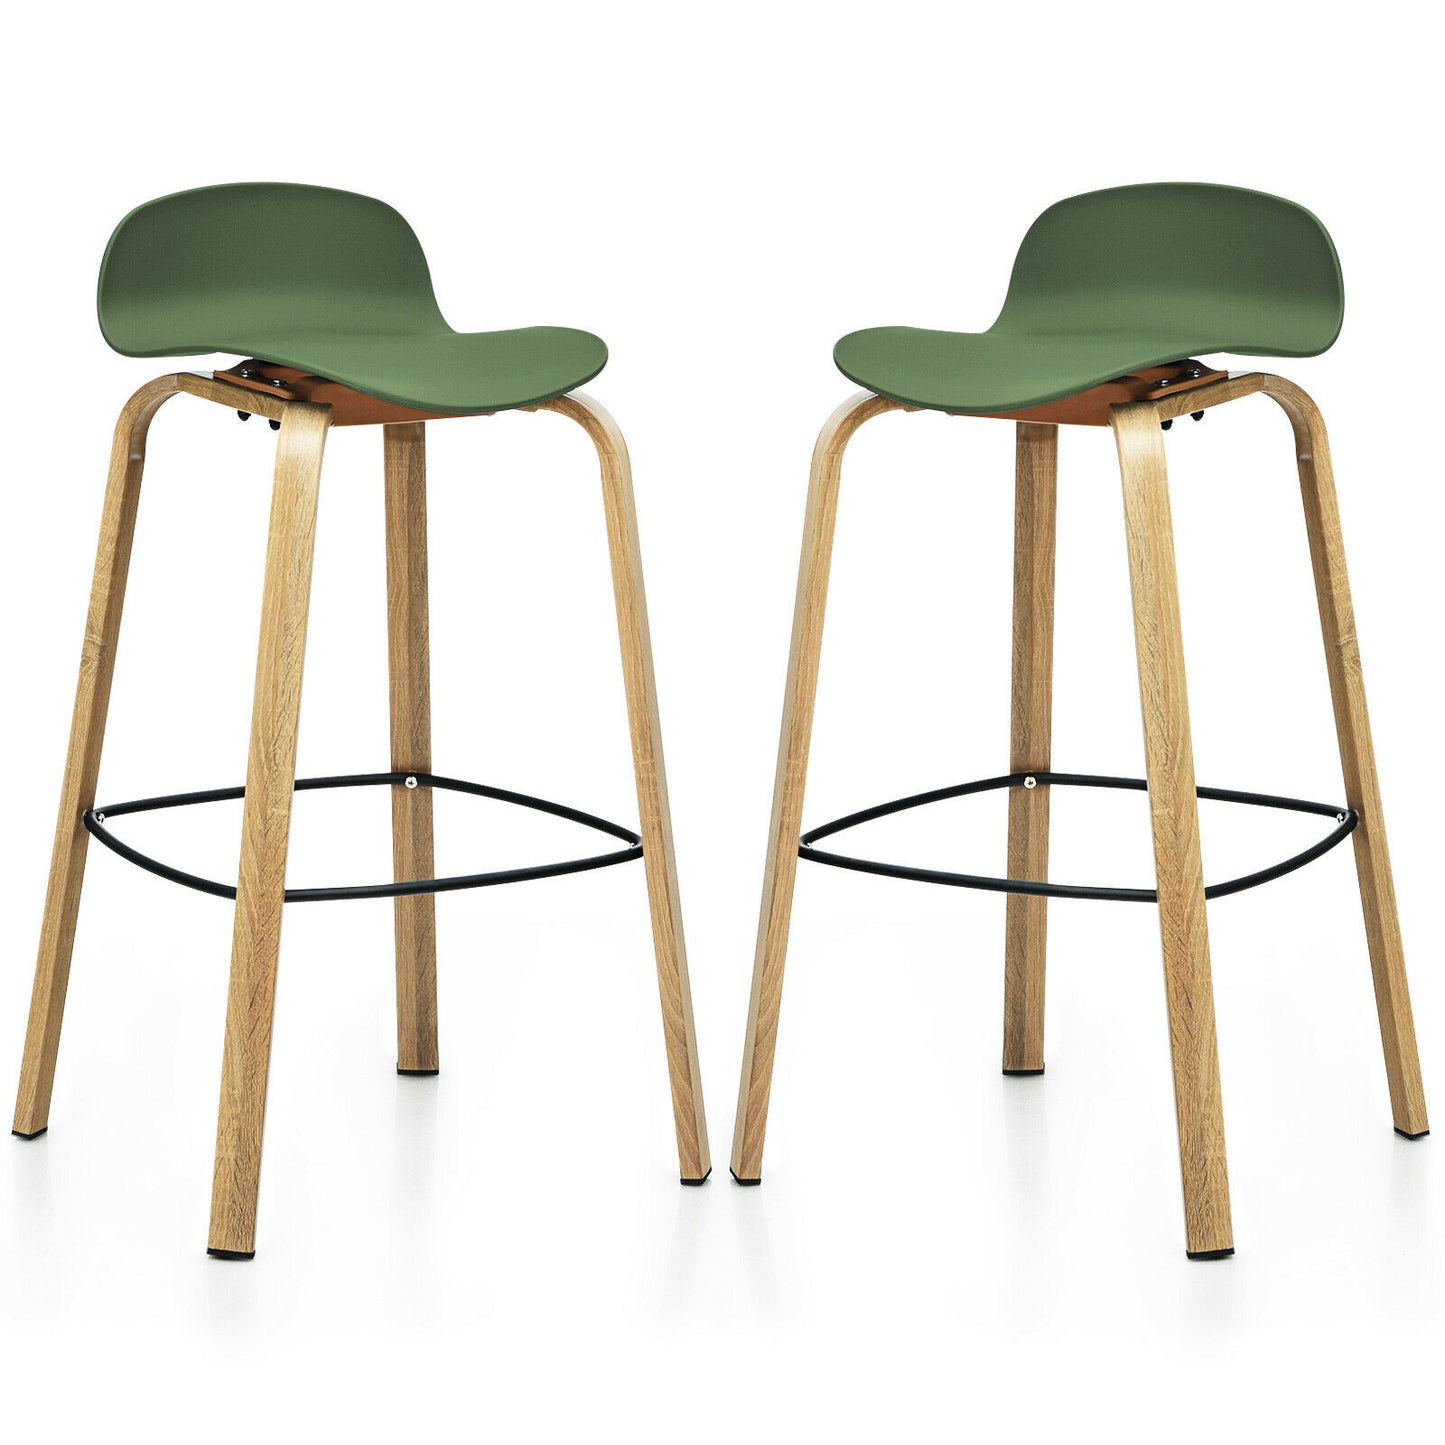 2 Bar Chairs High Counter Stools with Footrest - Money Green